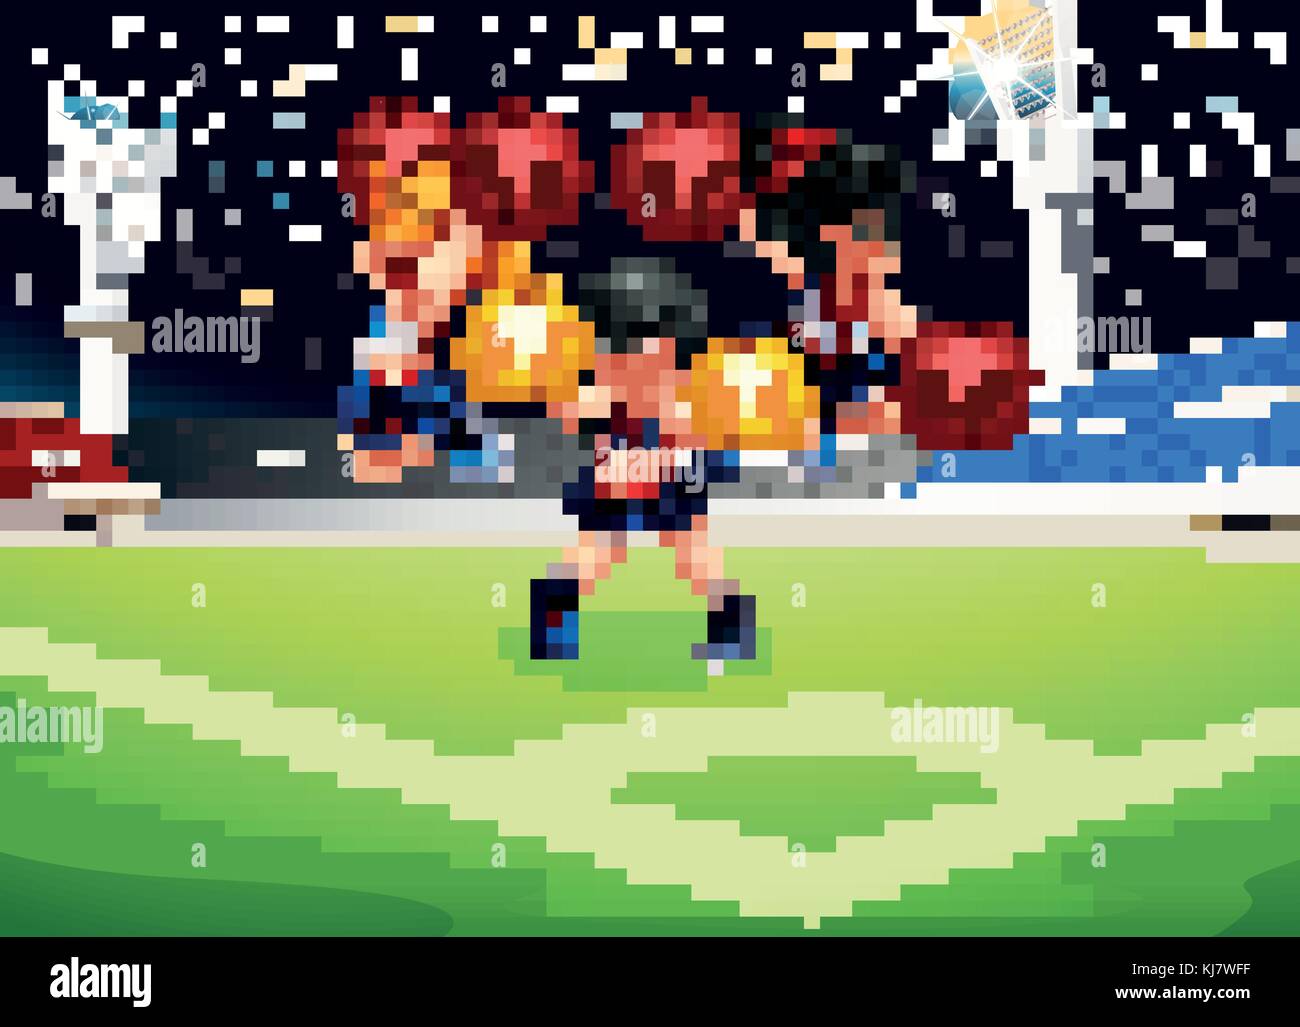 Illustration of the three cheerdancers performing in the soccer field Stock Vector